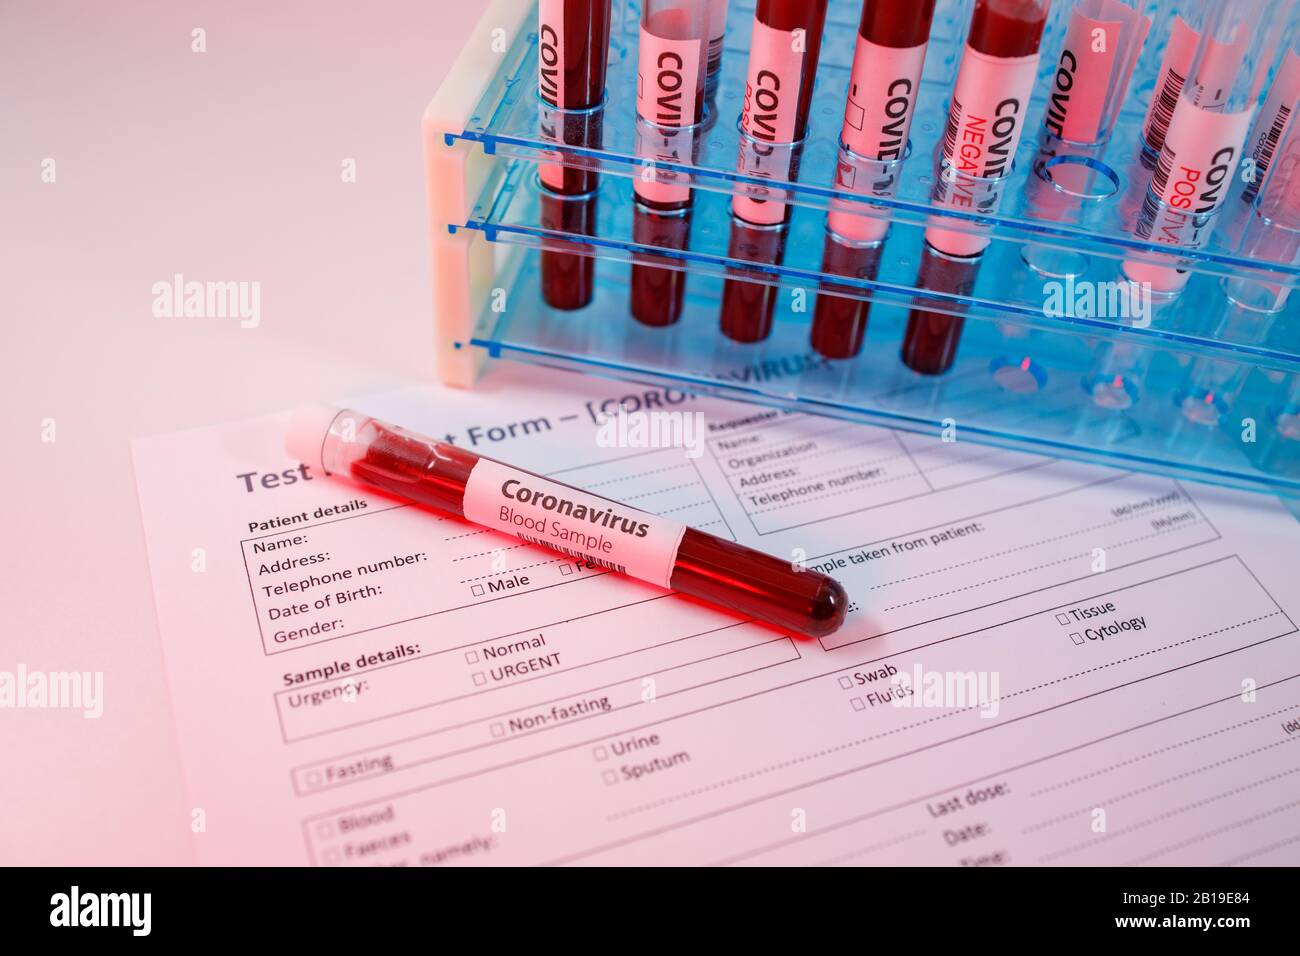 Blood sample for the new rapidly spreading Coronavirus that originated in Wuhan, China. Test tube on an empty test request form for covid-19, test tub Stock Photo